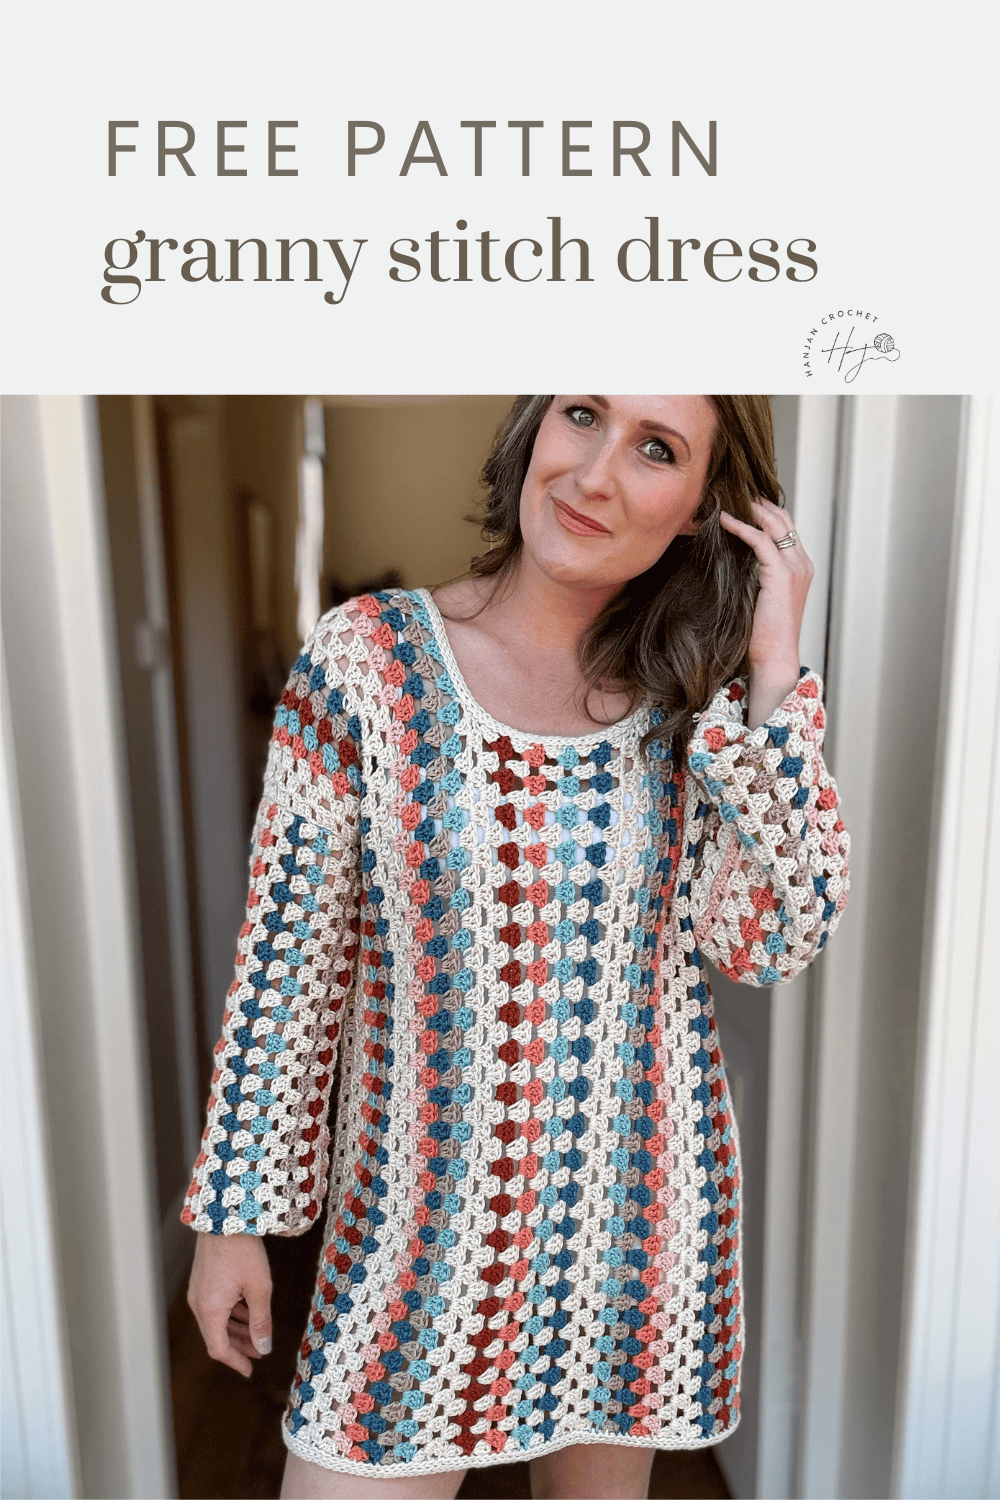 A person wearing a multicolored, long-sleeved granny stitch dress stands indoors with "Free Pattern: granny stitch dress" text above them.